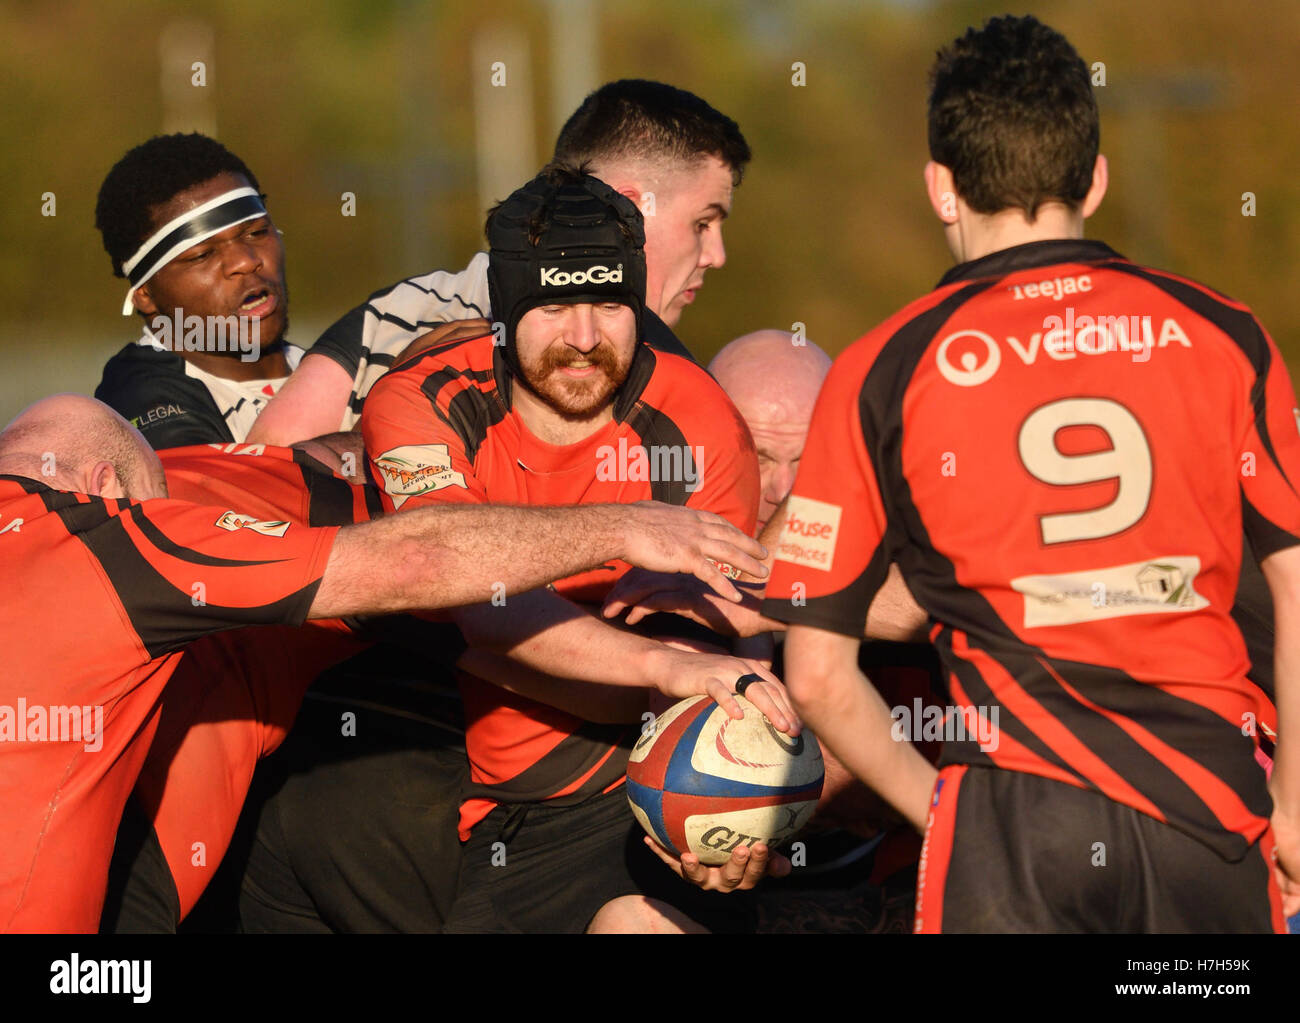 Manchester, UK. 5th Nov, 2016. Action from the South Lancashire/Cheshire Division 1 match between Broughton Park, in black, and Oswestrys, in red. Broughton Park win 62-0, after leading 22-0 at half-time to move into second place and keep Oswestry in bottom place. Credit:  John Fryer/Alamy Live News Stock Photo